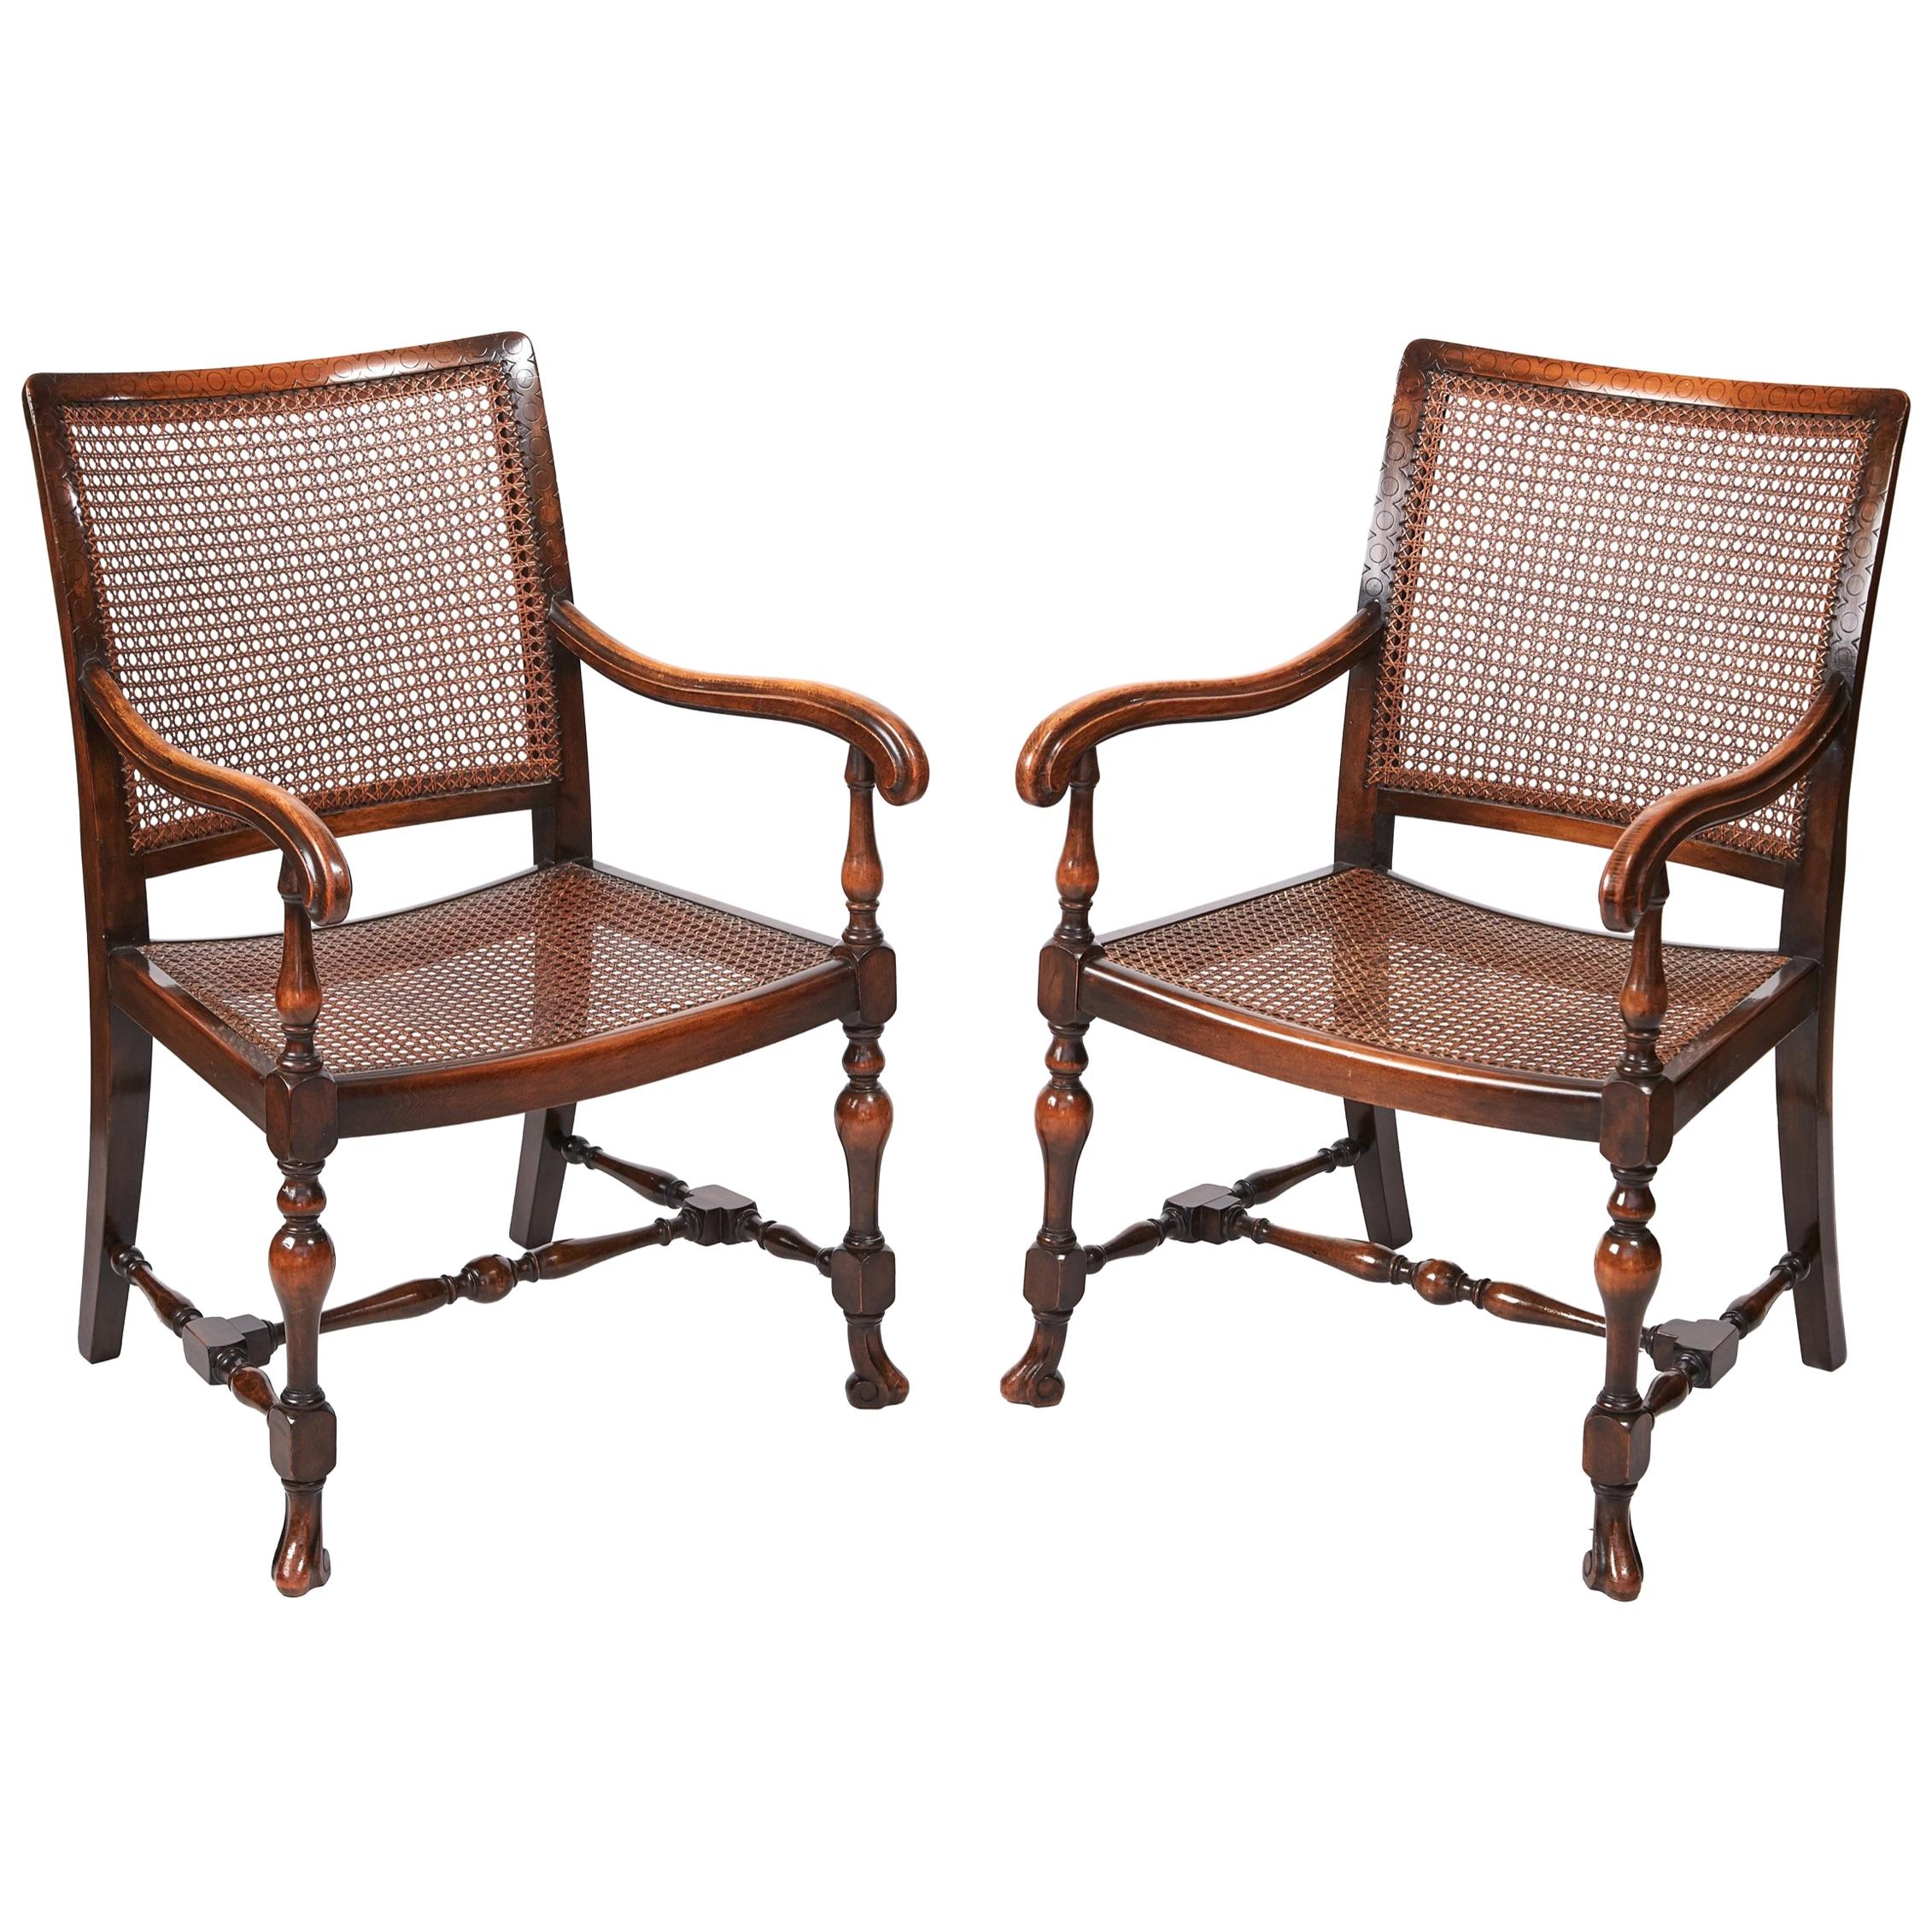 Pair of William and Mary Style Bergere Armchairs